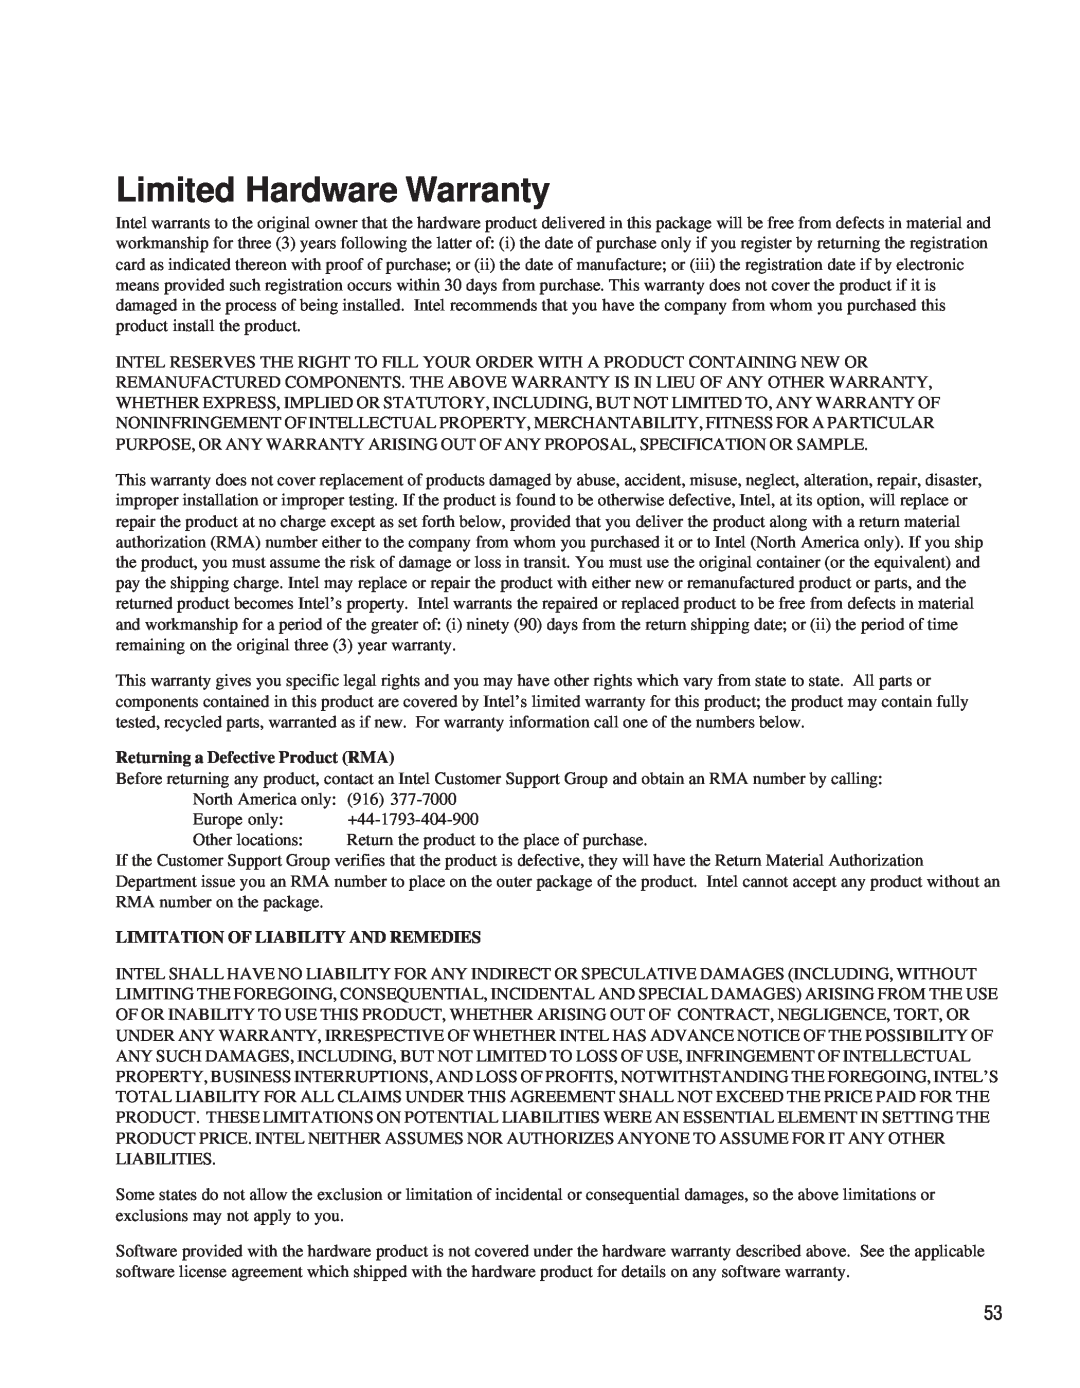 Intel EE110MM manual Limited Hardware Warranty, Returning a Defective Product RMA, Limitation Of Liability And Remedies 